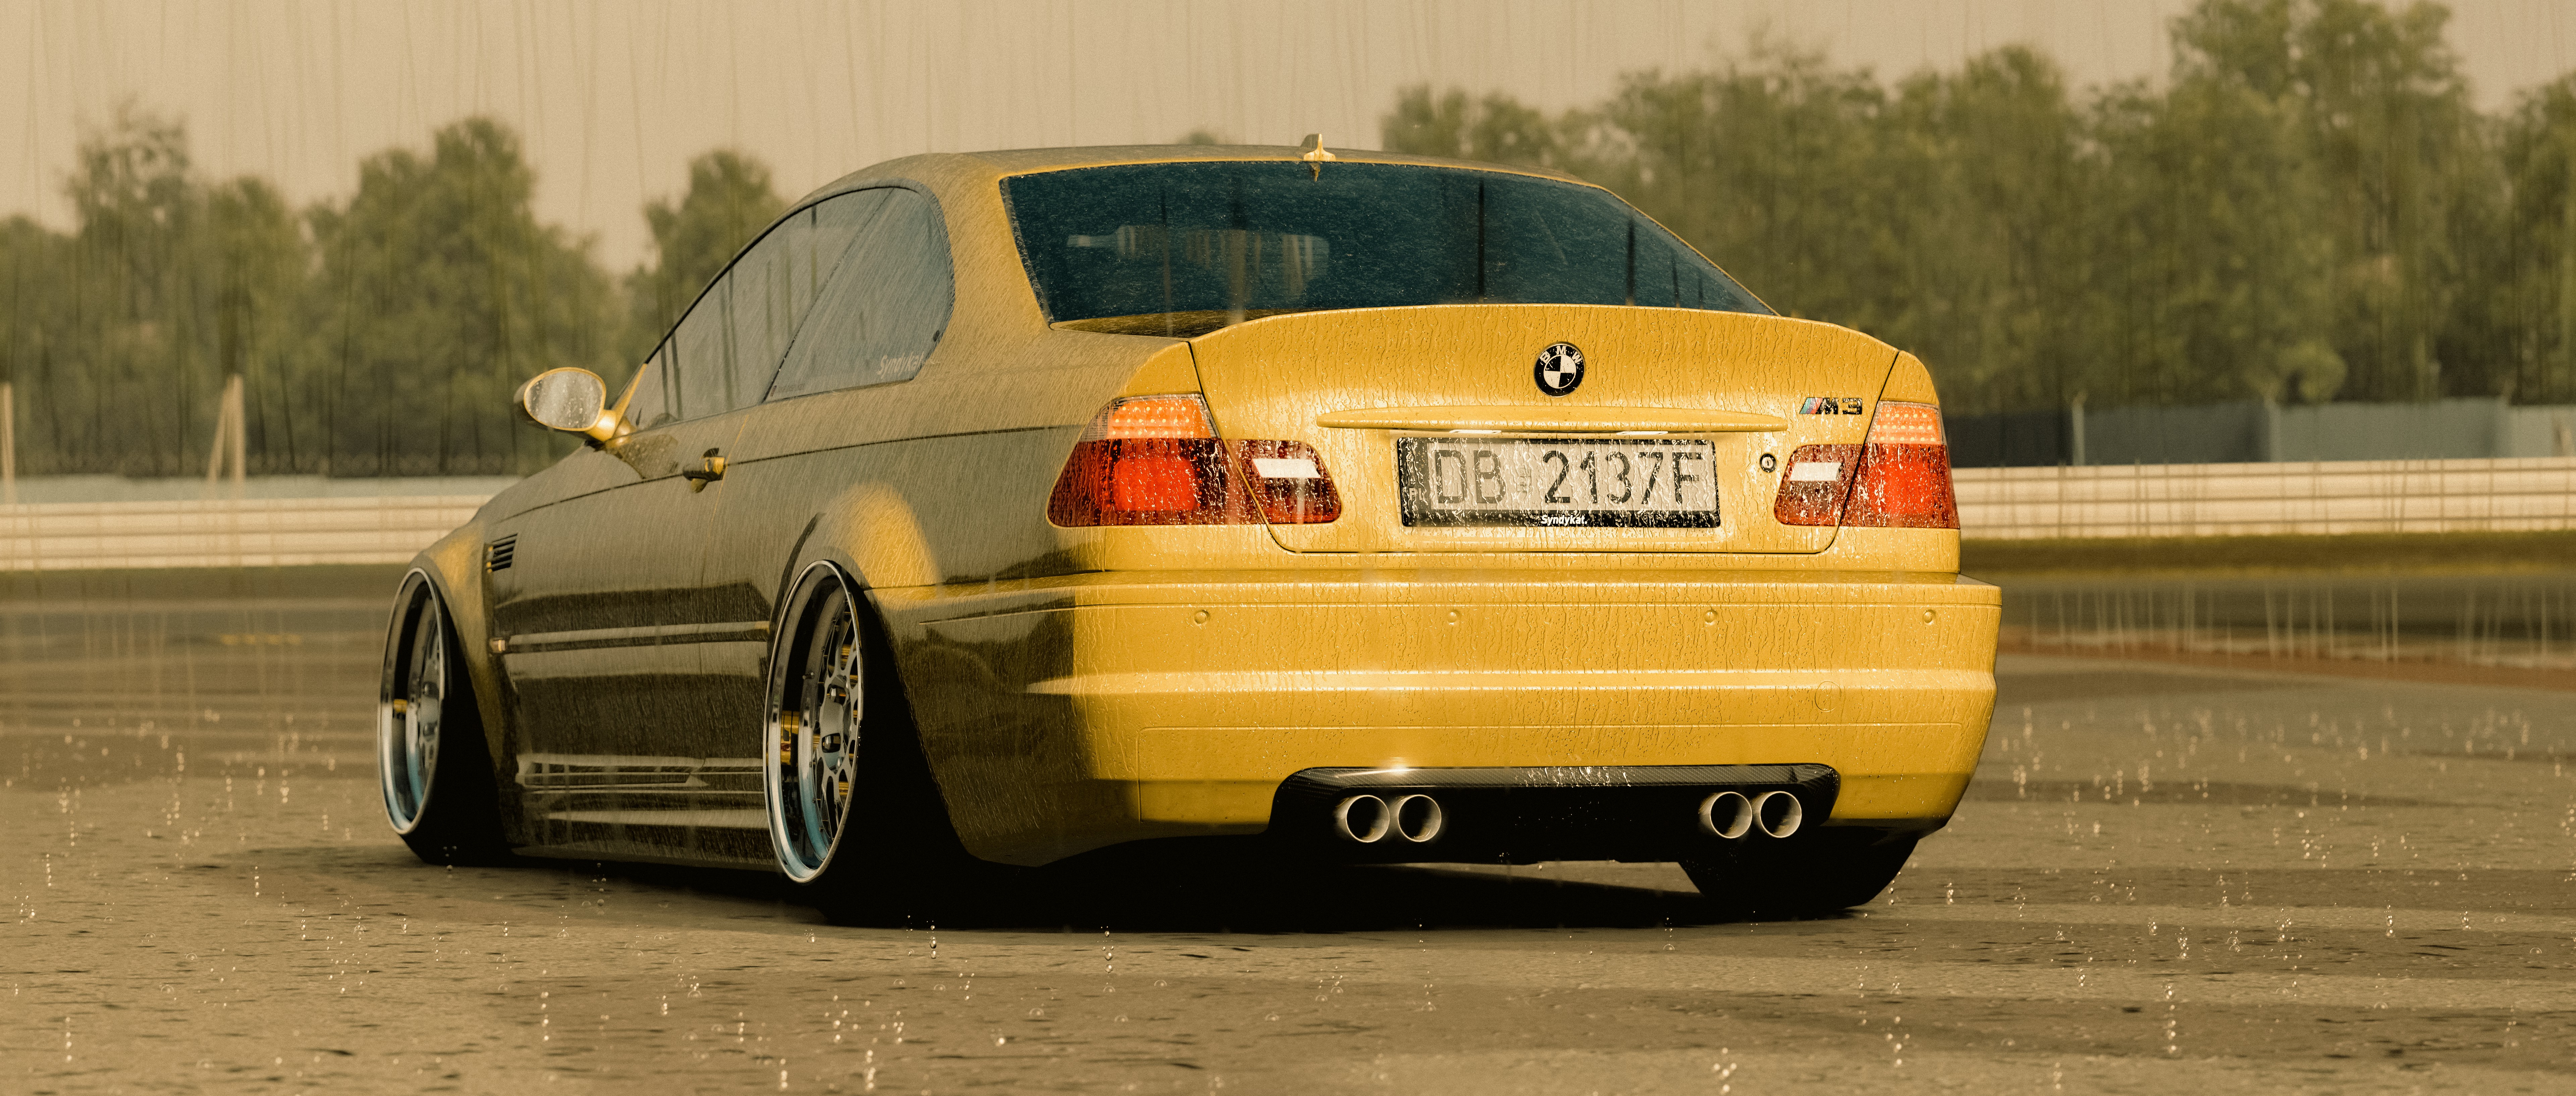 General 7680x3269 BMW BMW E46 BMW M3  Assetto Corsa PC gaming rain race tracks car rear view licence plates video game art trees video games